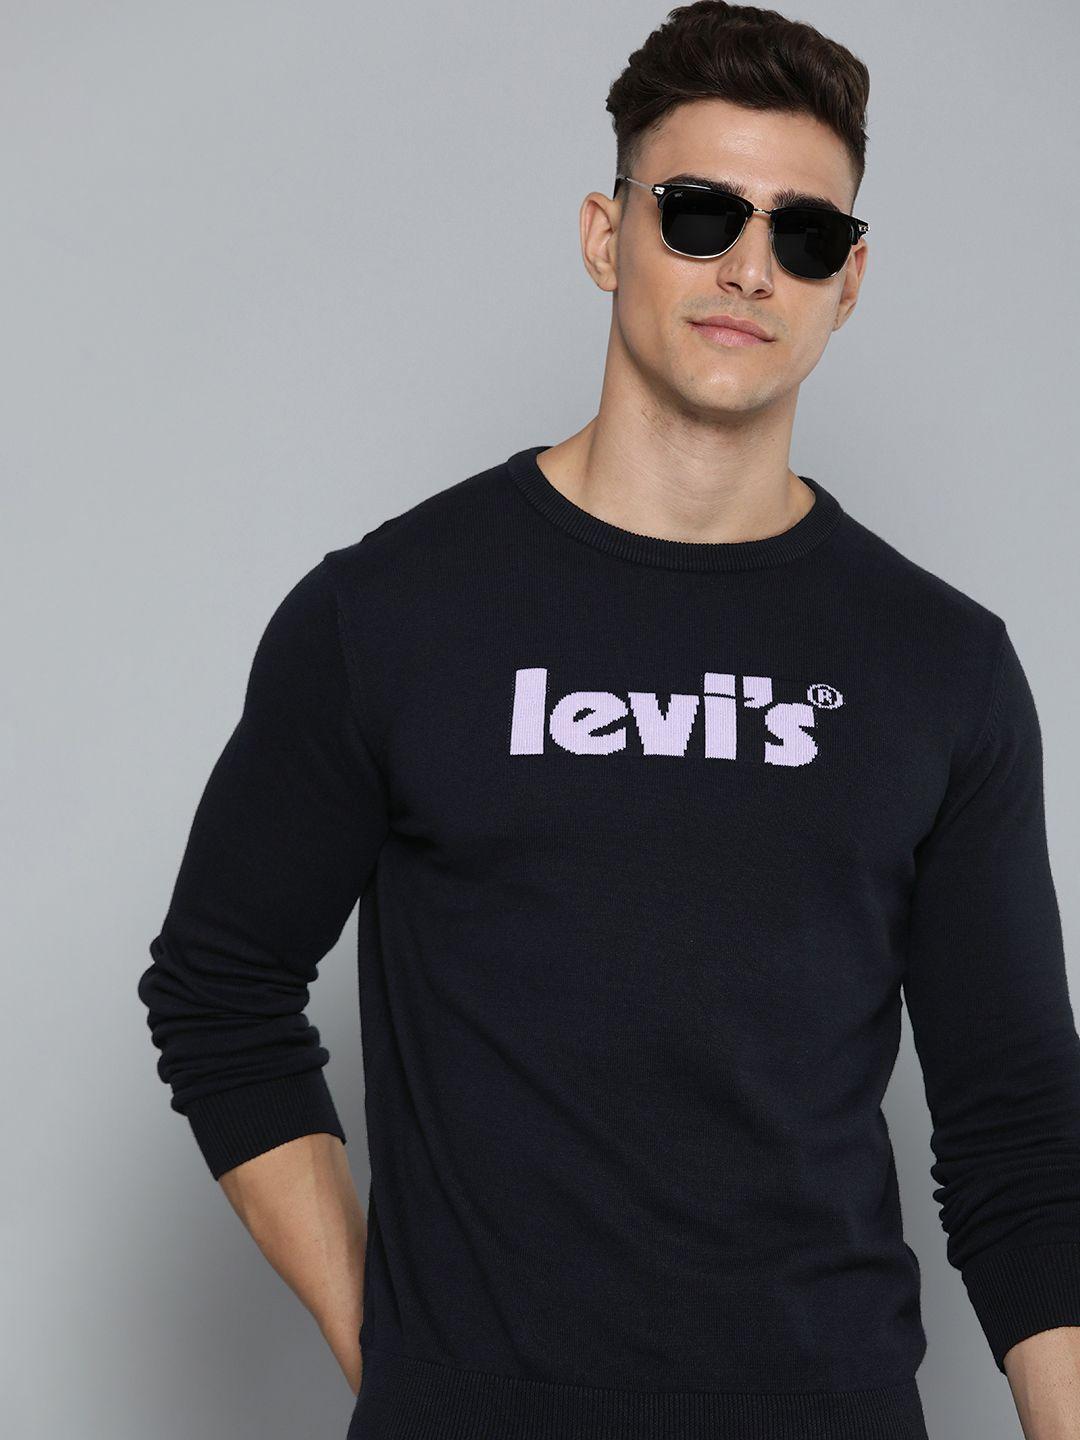 levis-brand-logo-printed-pure-cotton-pullover-sweater